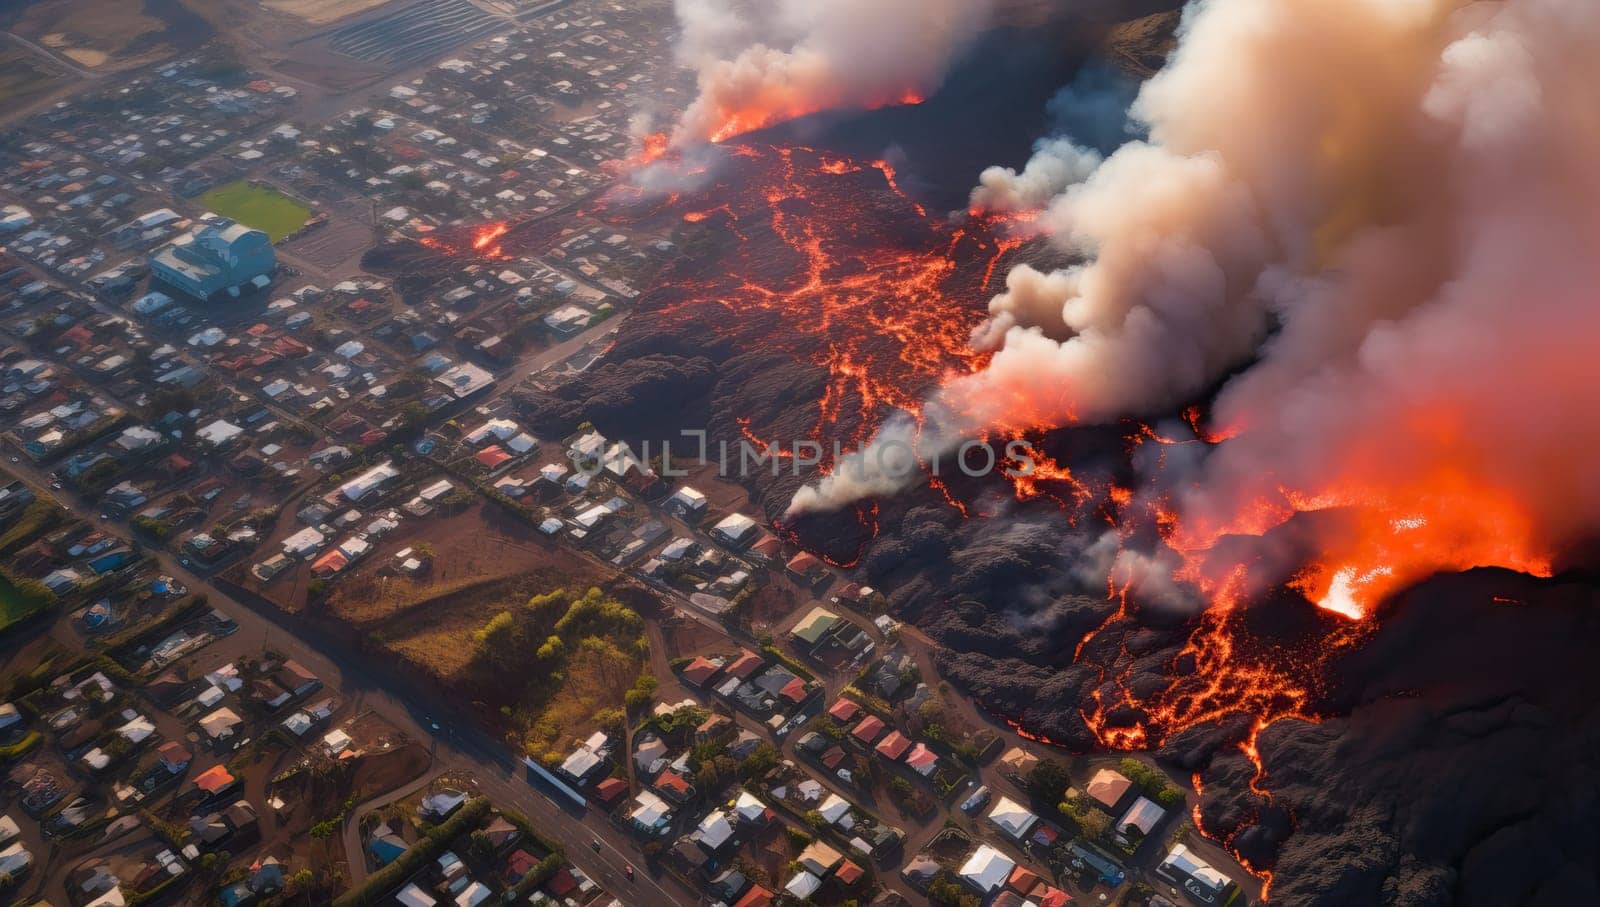 City engulfed in flames and smoke viewed from above